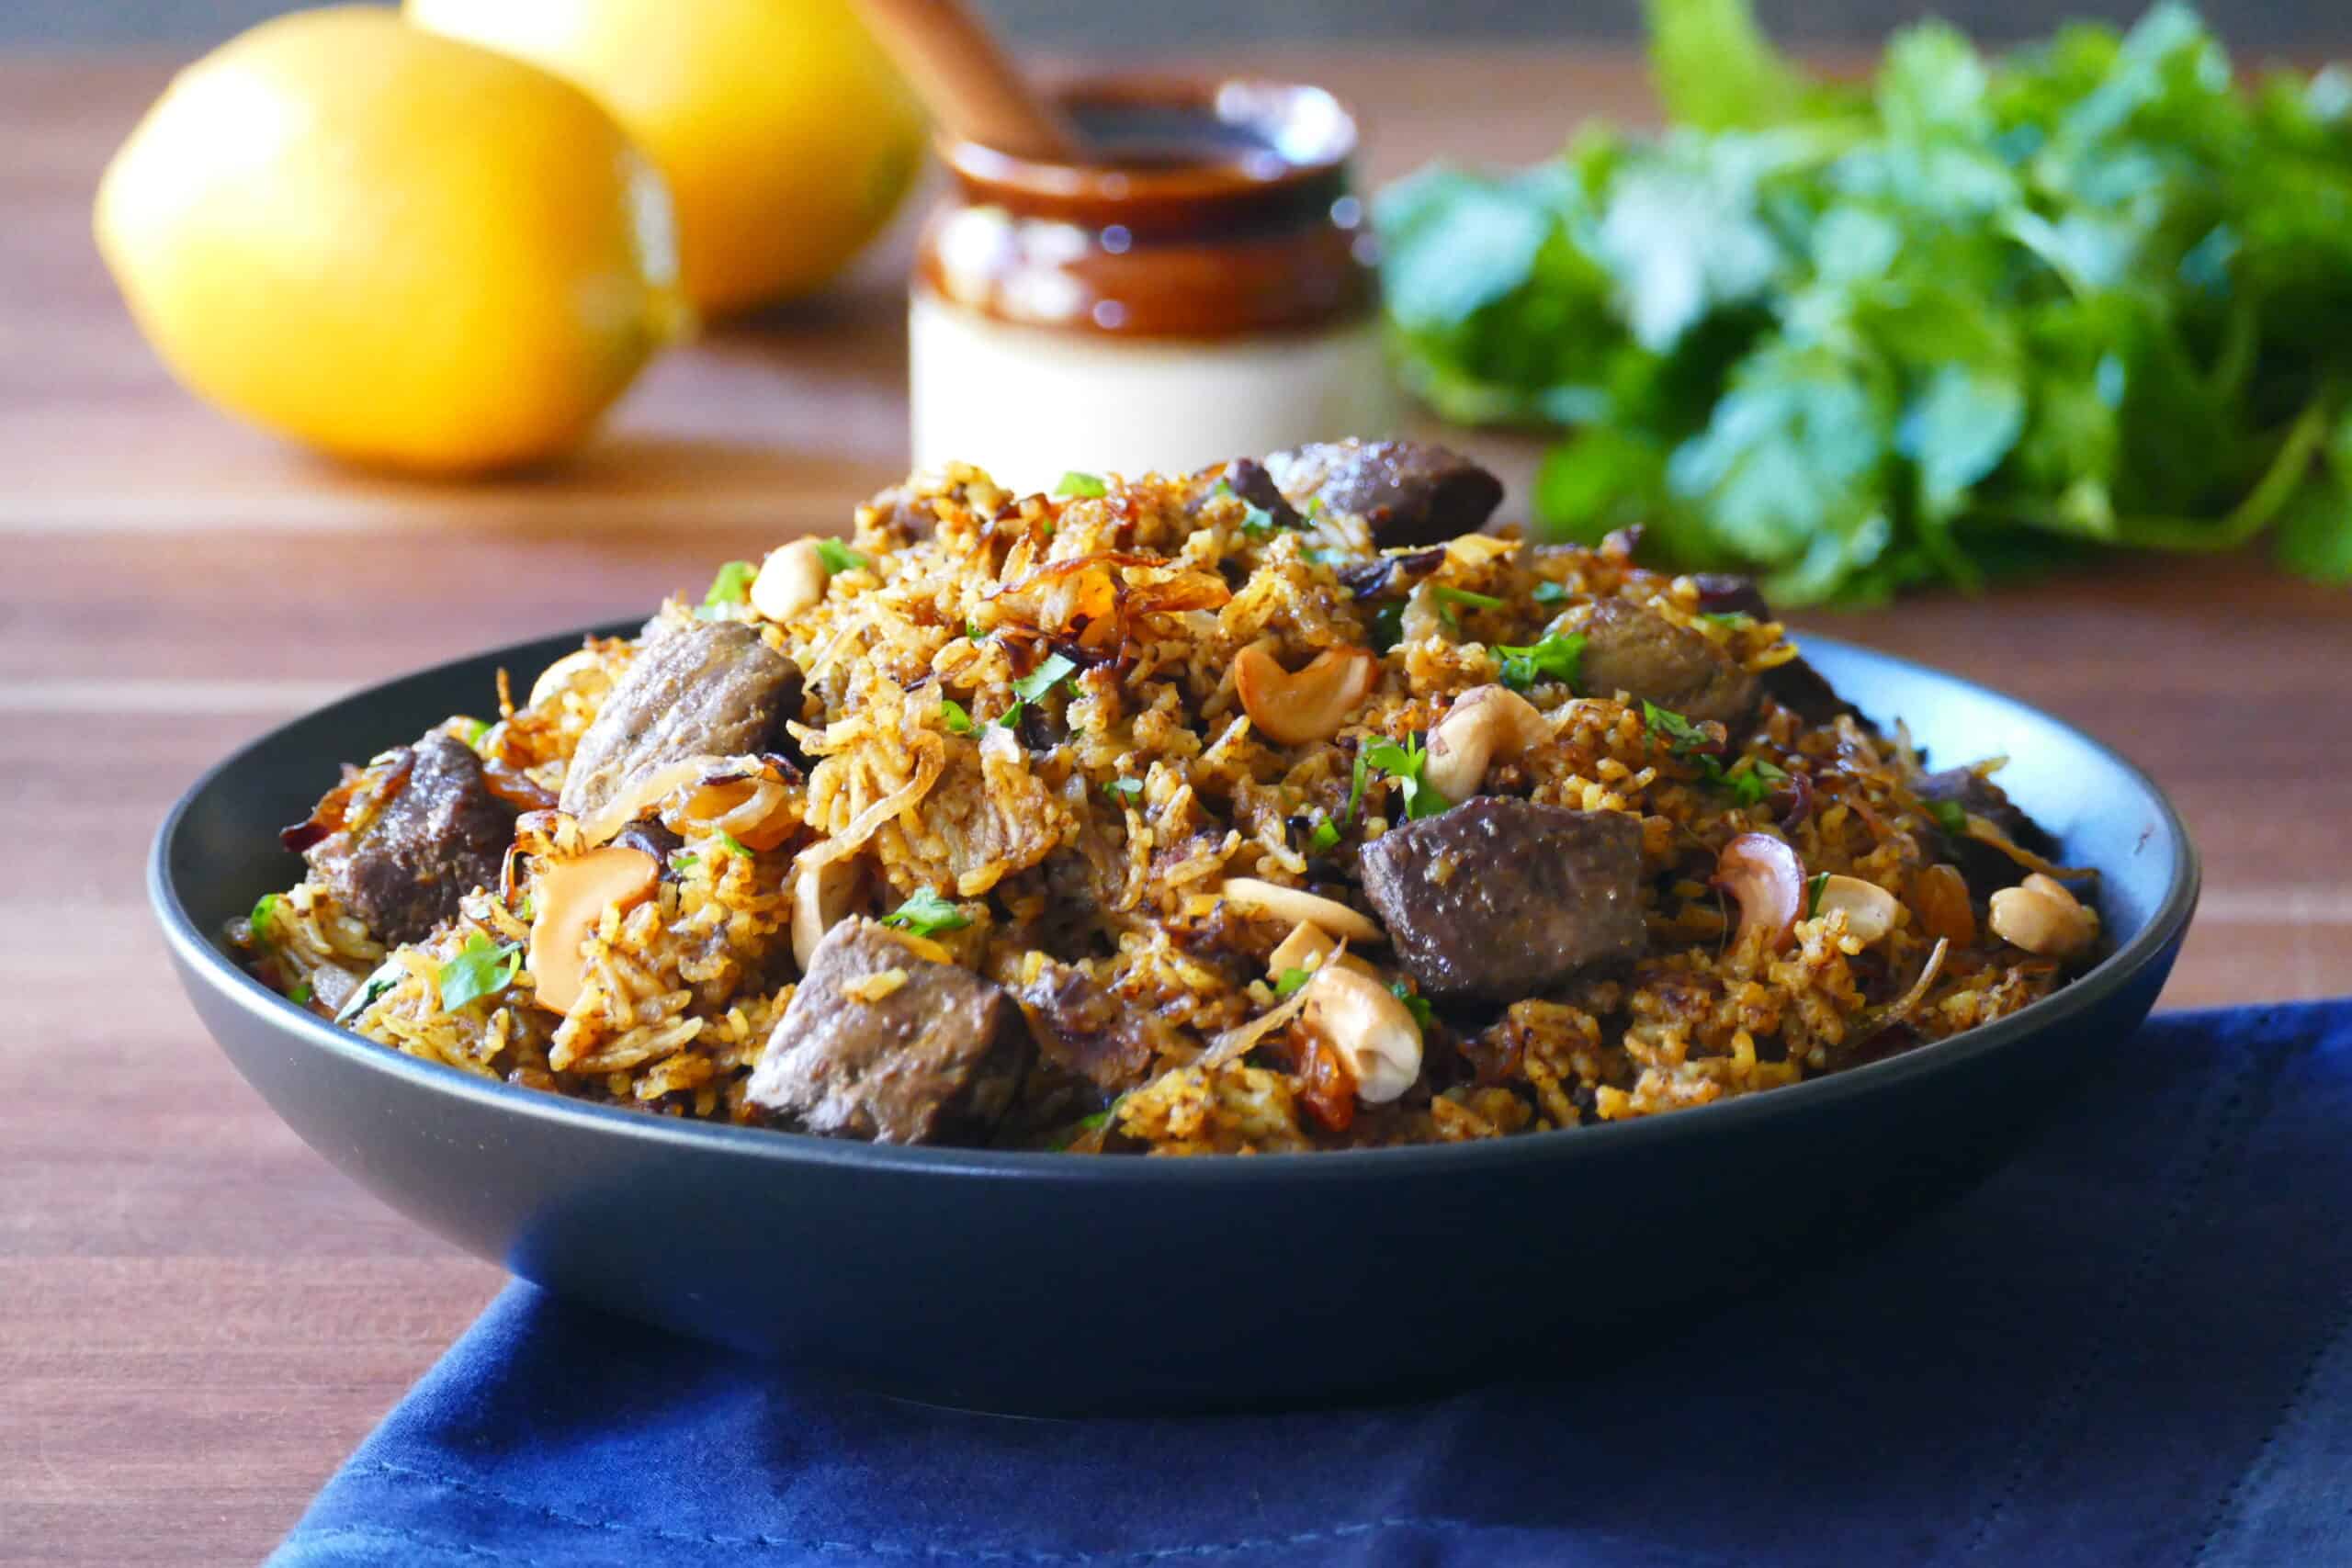 Instant Pot lamb biryani in a black bowl has rice, cashews, pieces of browned lamb on a blue napkin.